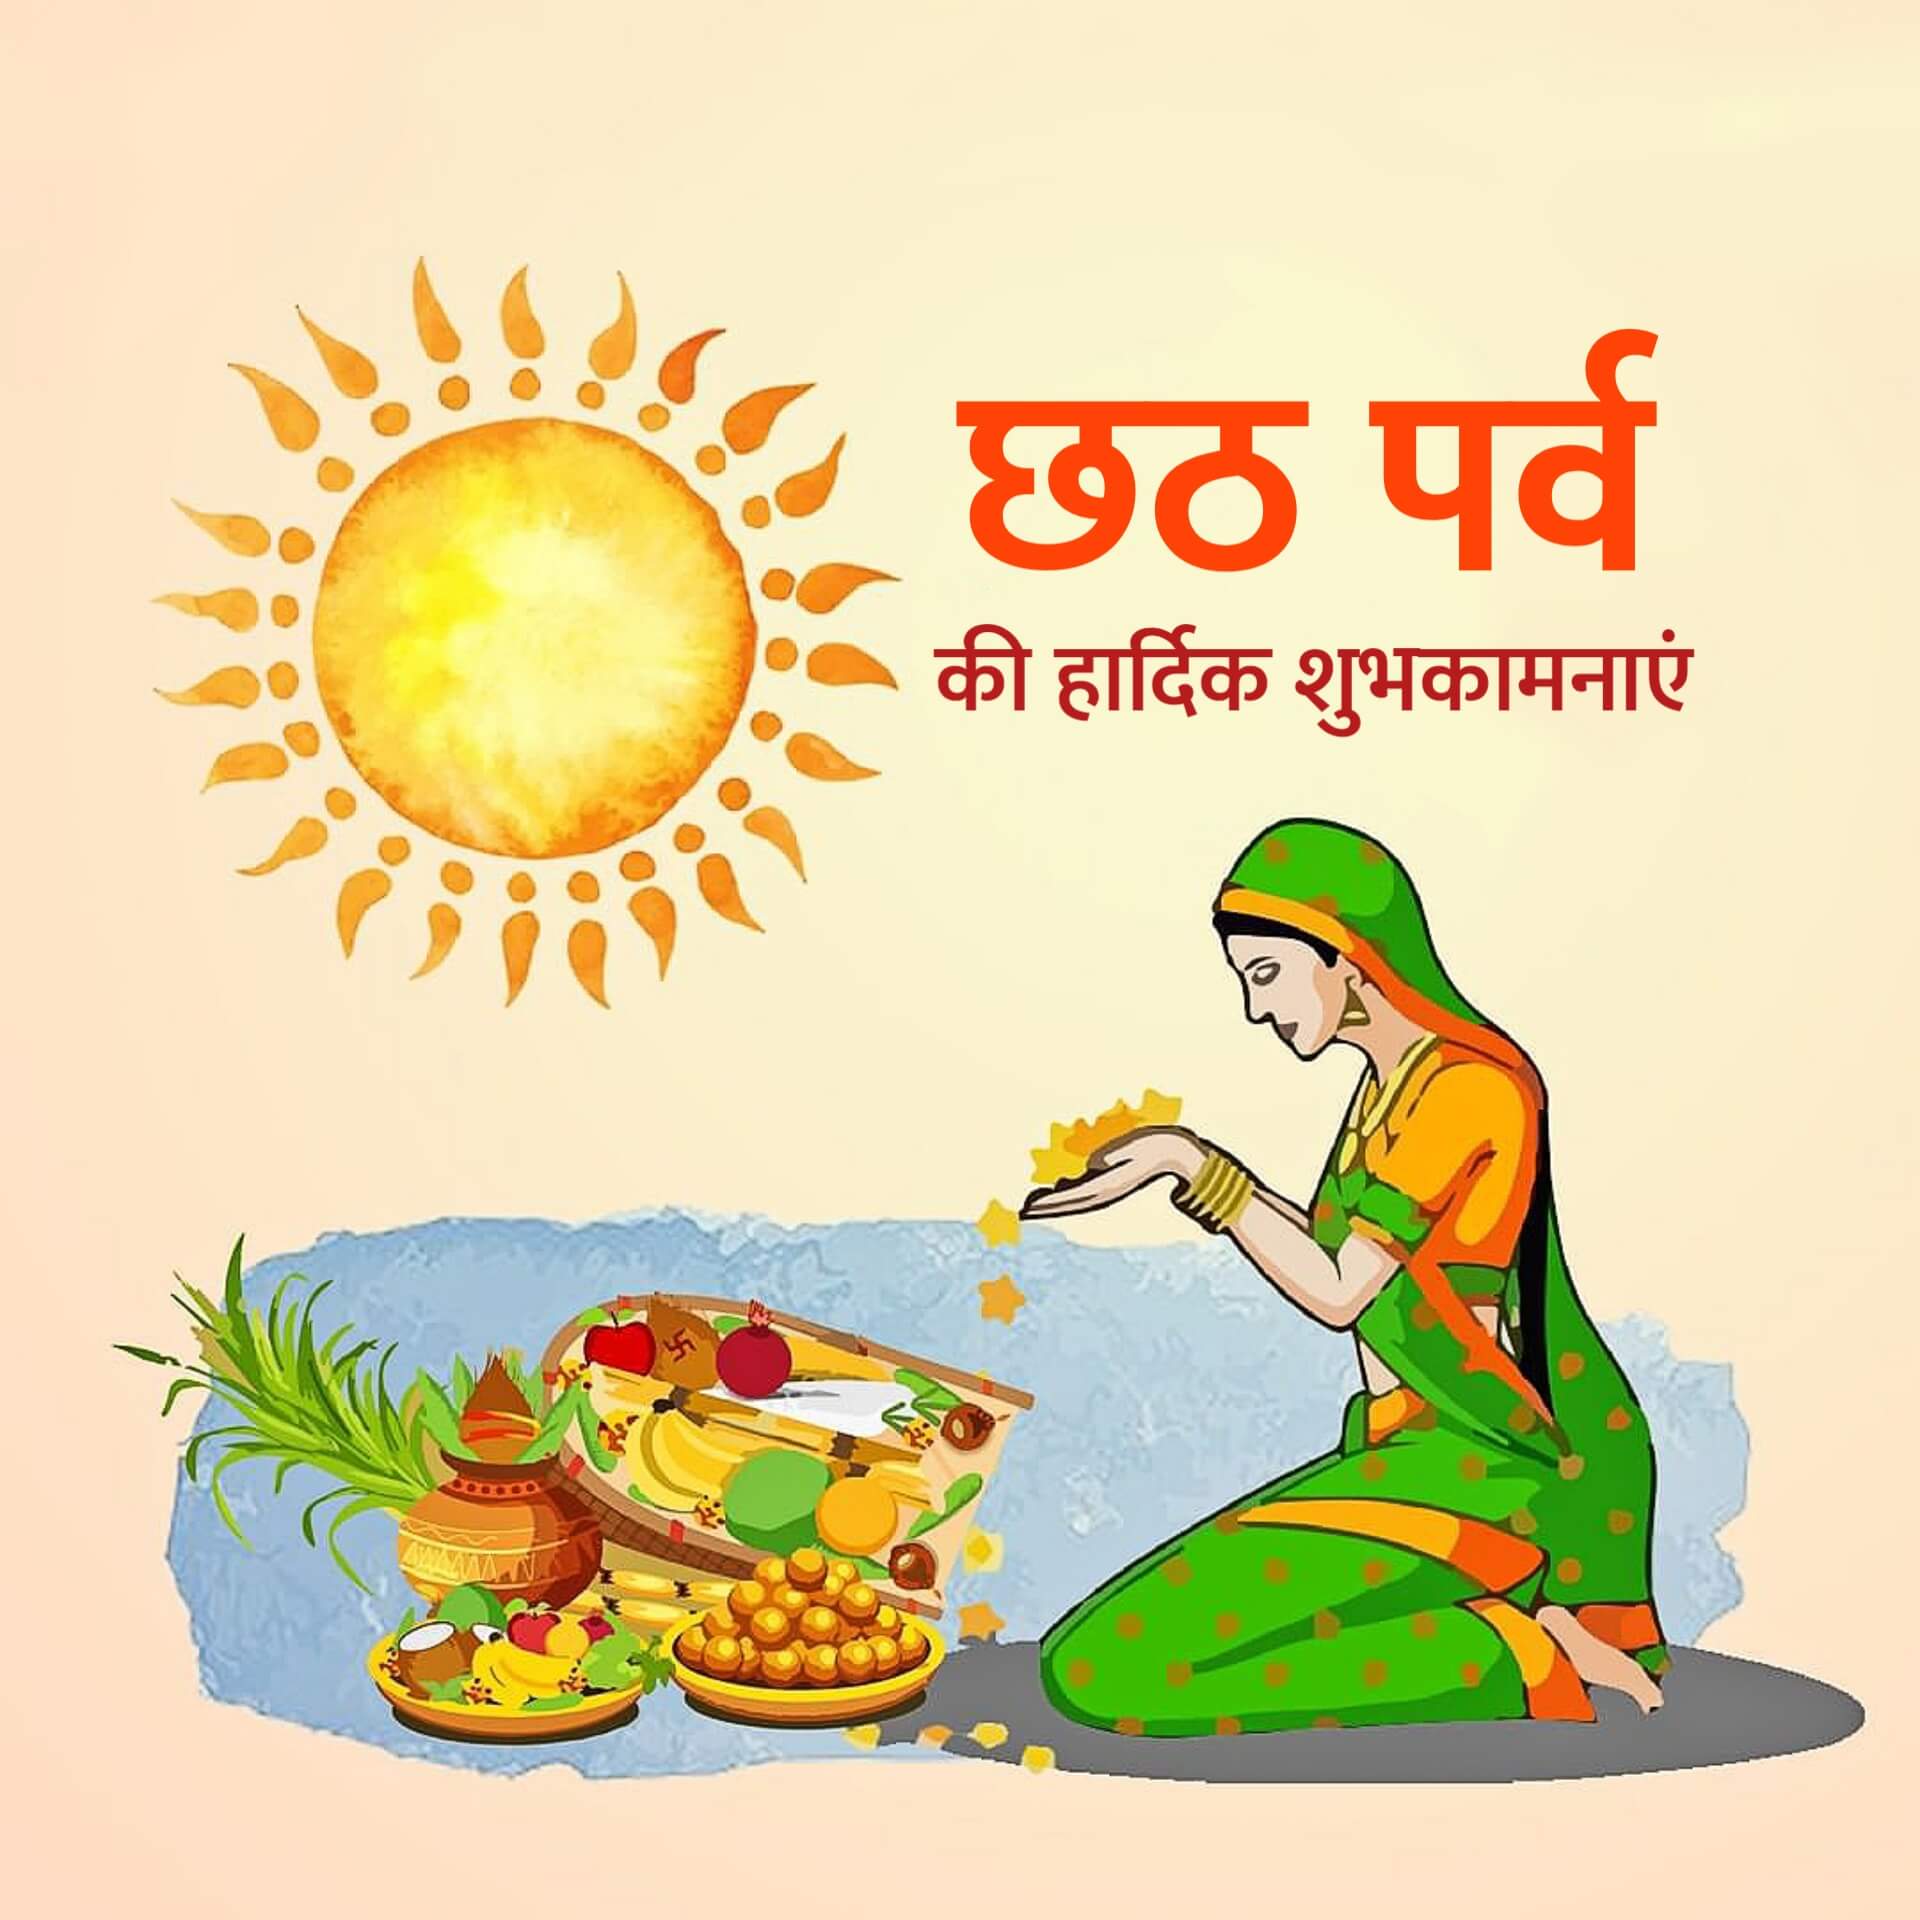 34+ BEST Happy Chhath Puja Image, Photos, Pictures & Wishes